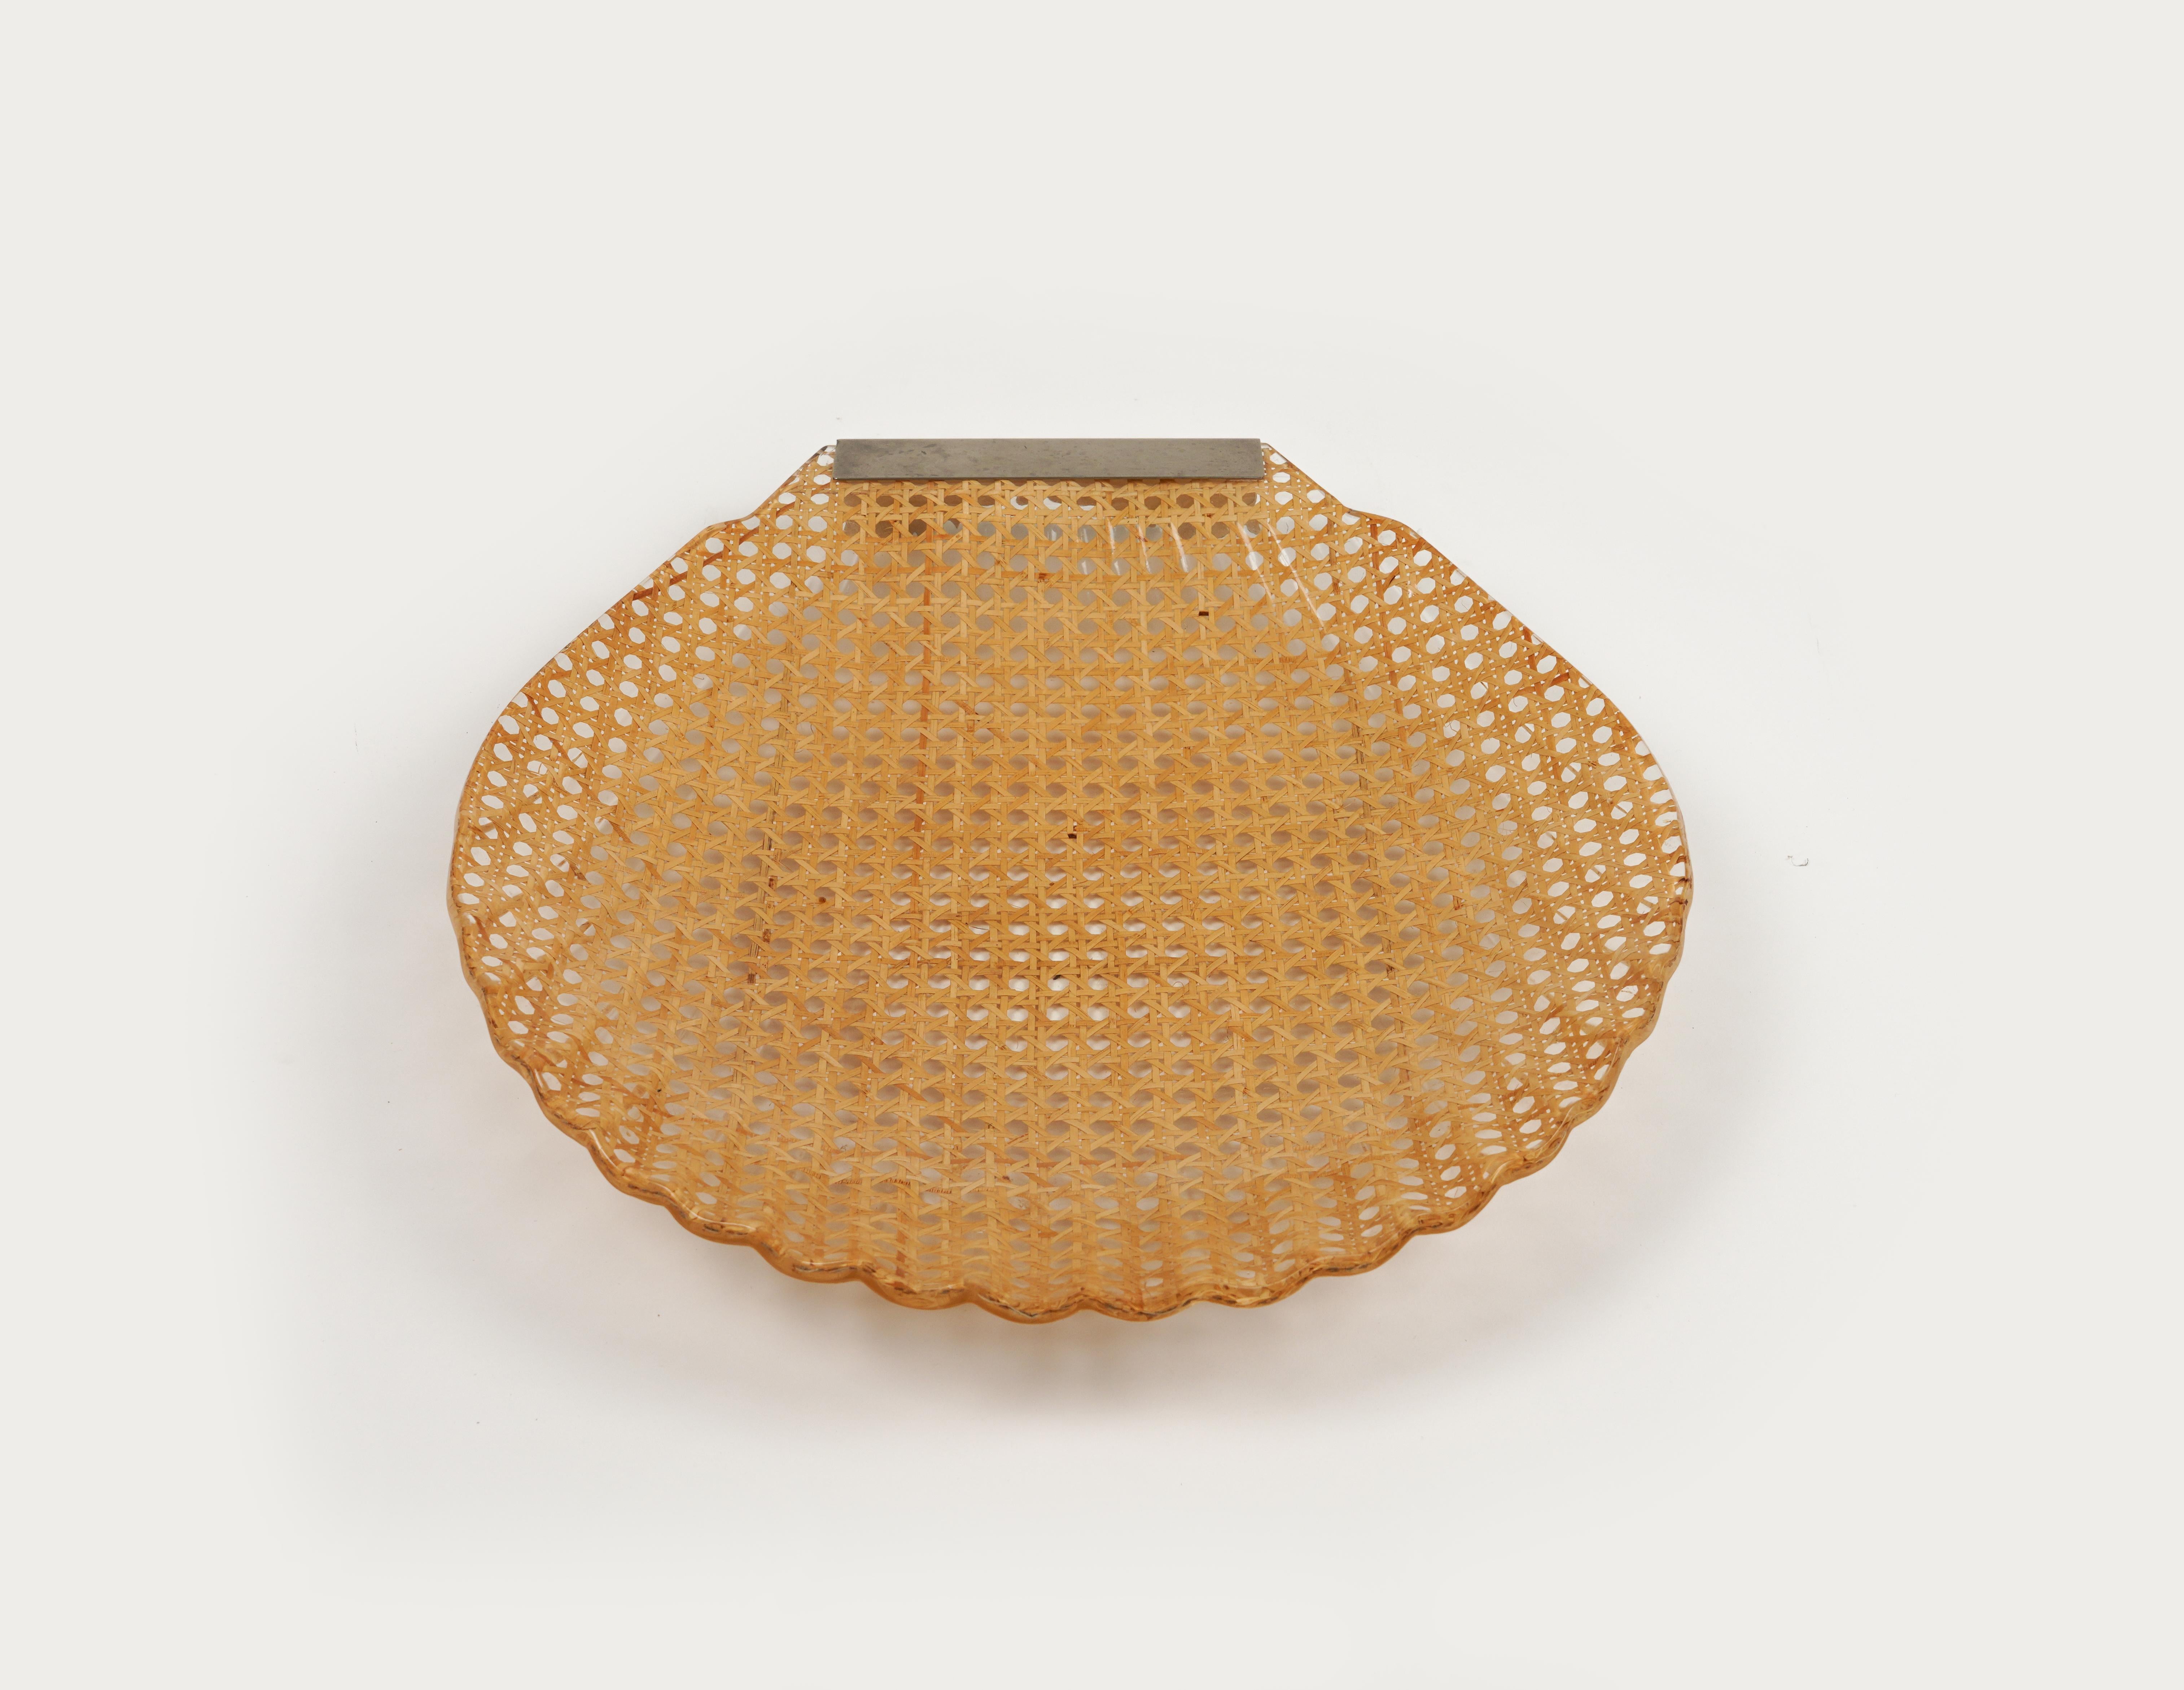 Midcentury amazing shell shaped centerpiece / serving tray in lucite, rattan and silvered brass detail in the style of Christian Dior Home.

Made in France in the 1970s.